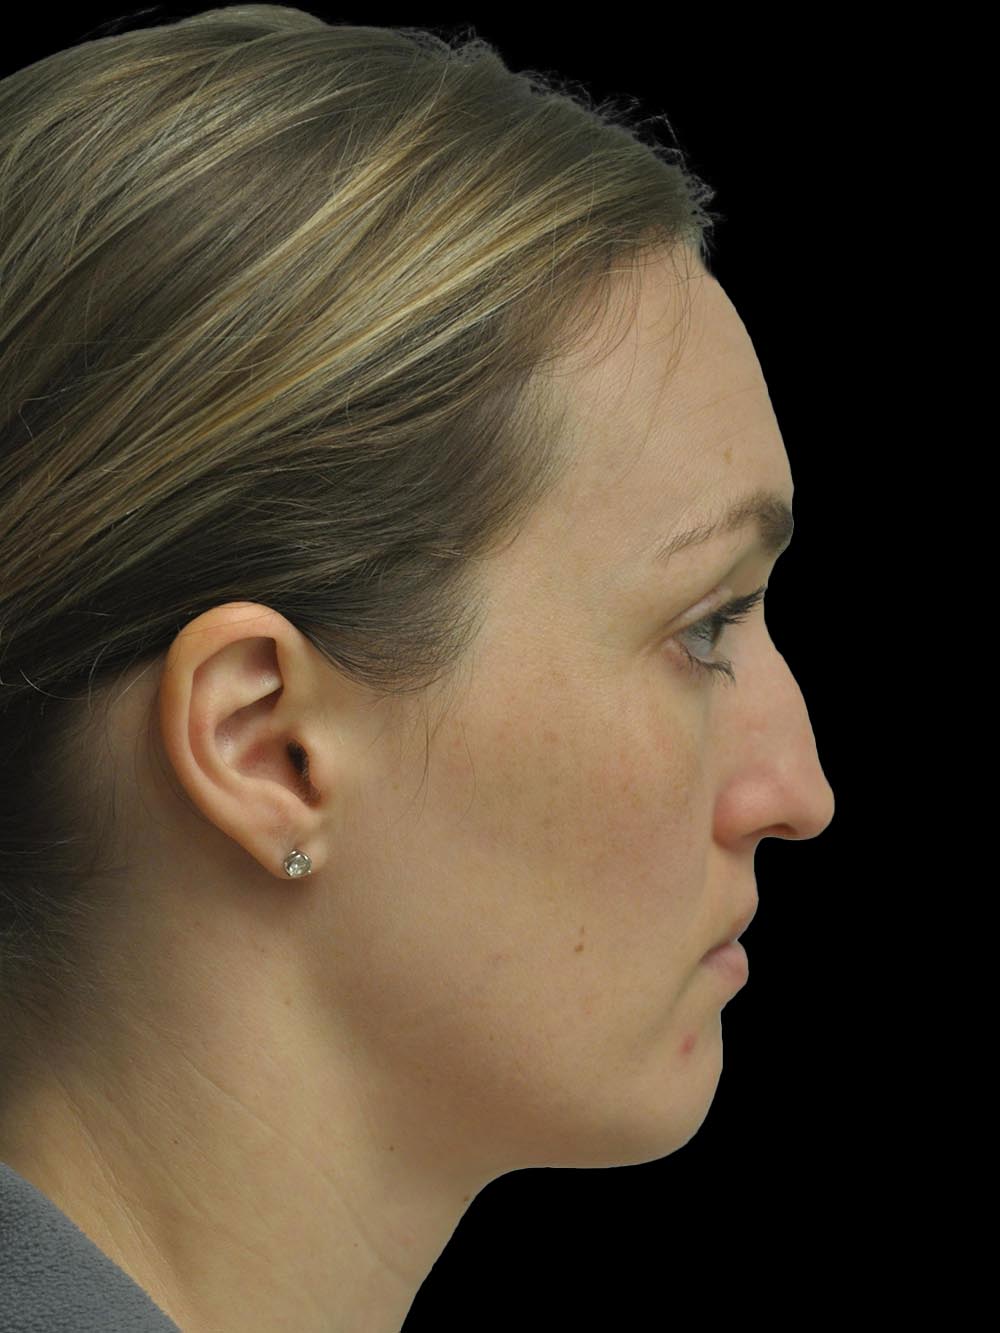 Photo of the patient’s face before the Rhinoplasty surgery. Patient 16 - Set 5